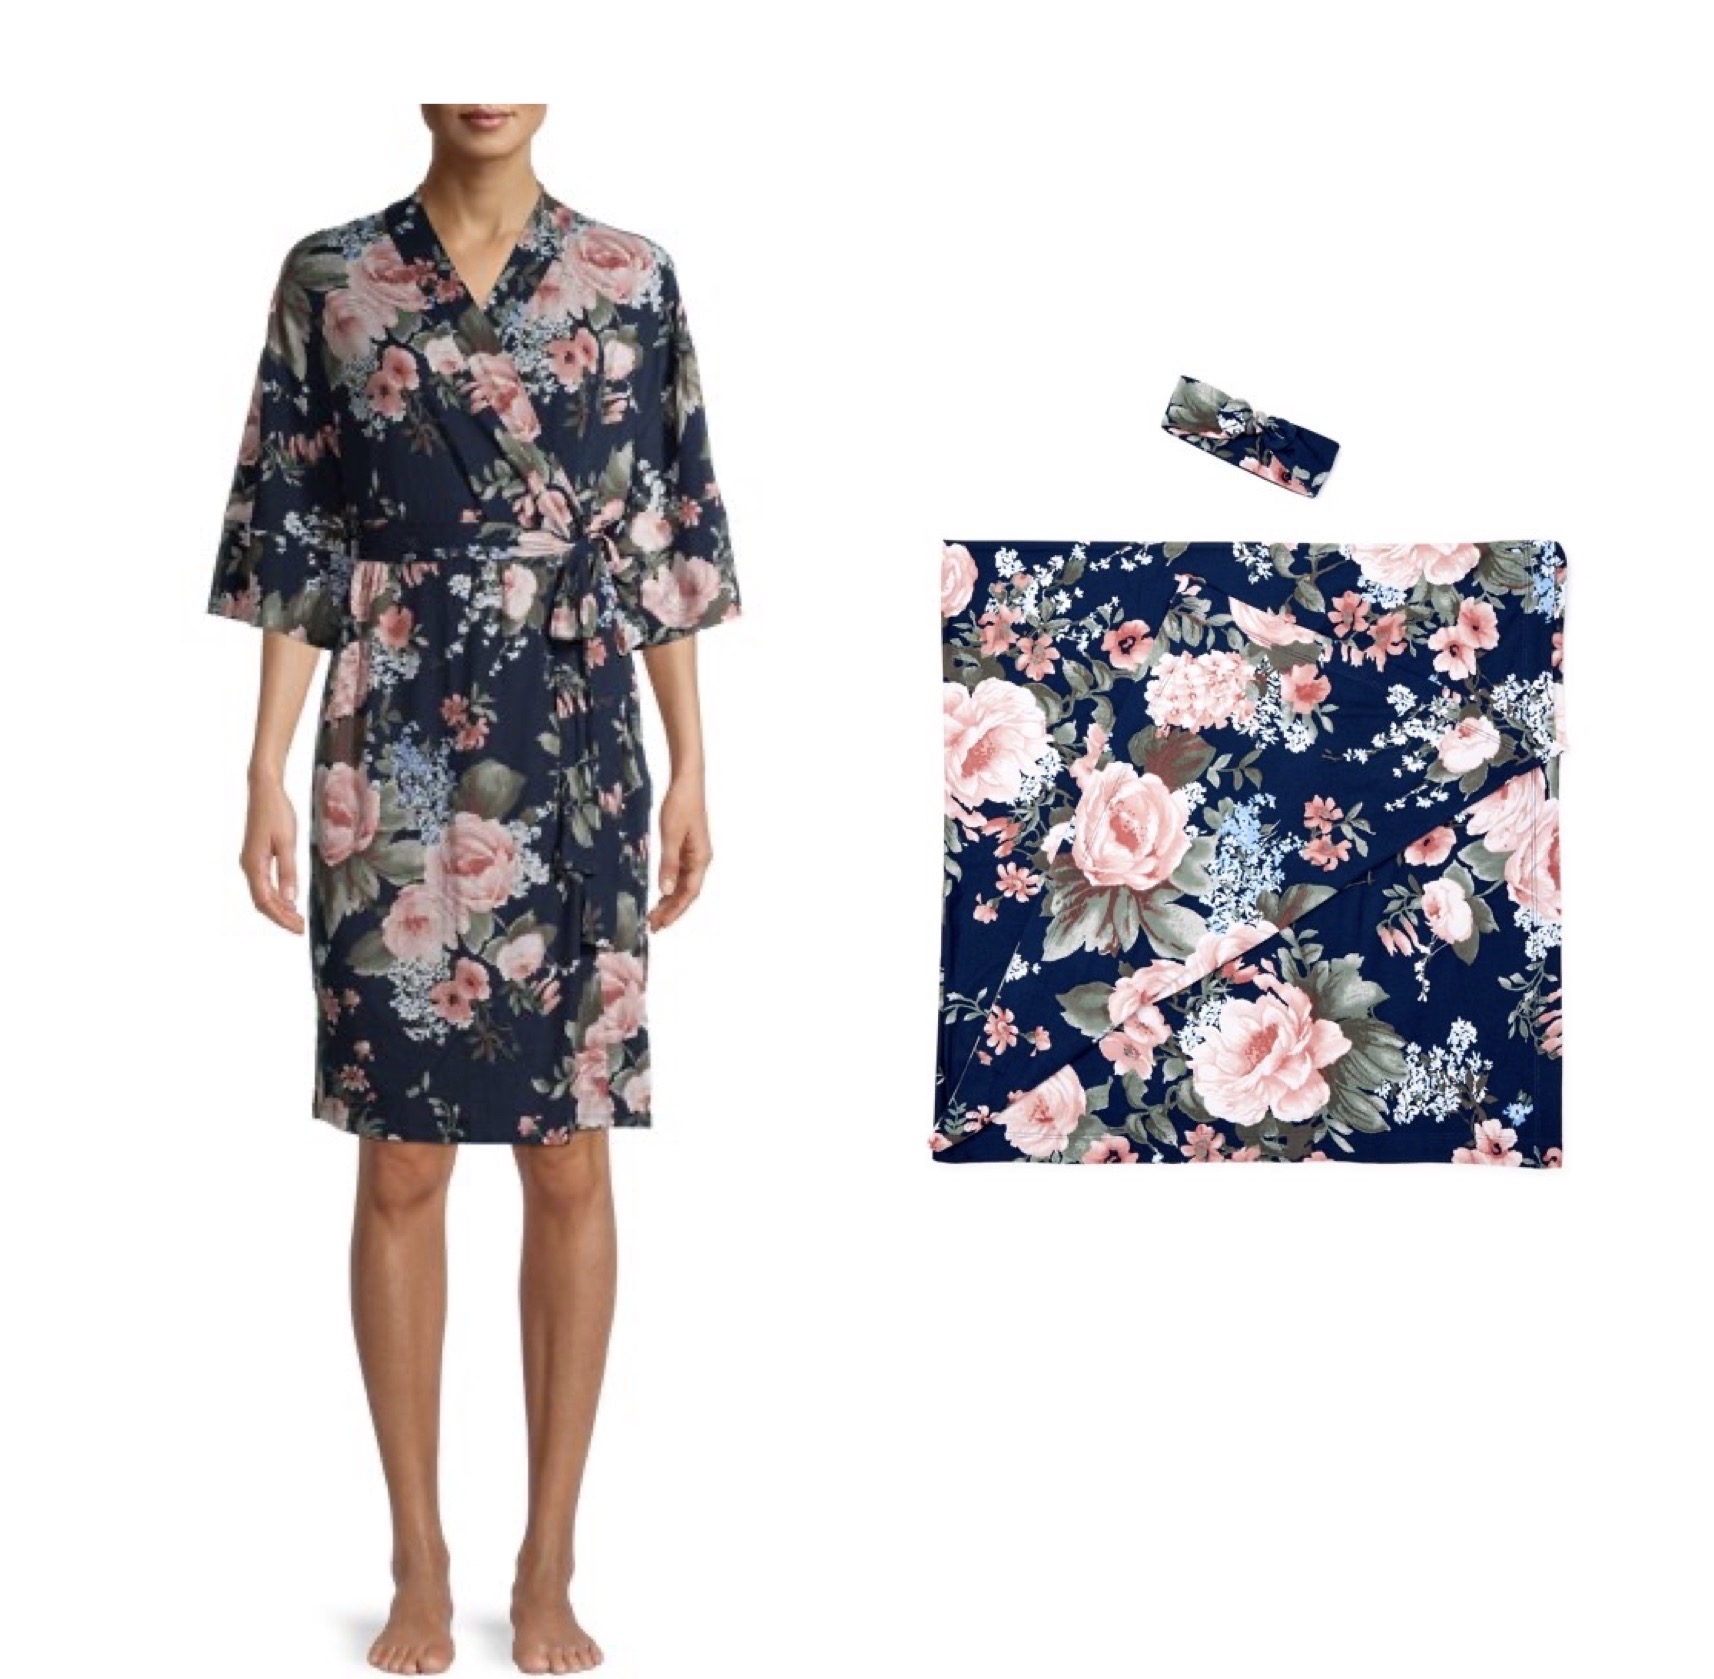 3-Piece Mommy & Me Matching Women's Robe + Infant Swaddle + Infant Headband or Knot Cap (navy floral, grey stripe; size S/M only) $5 + Free Shipping w/ Walmart+ or on $35+